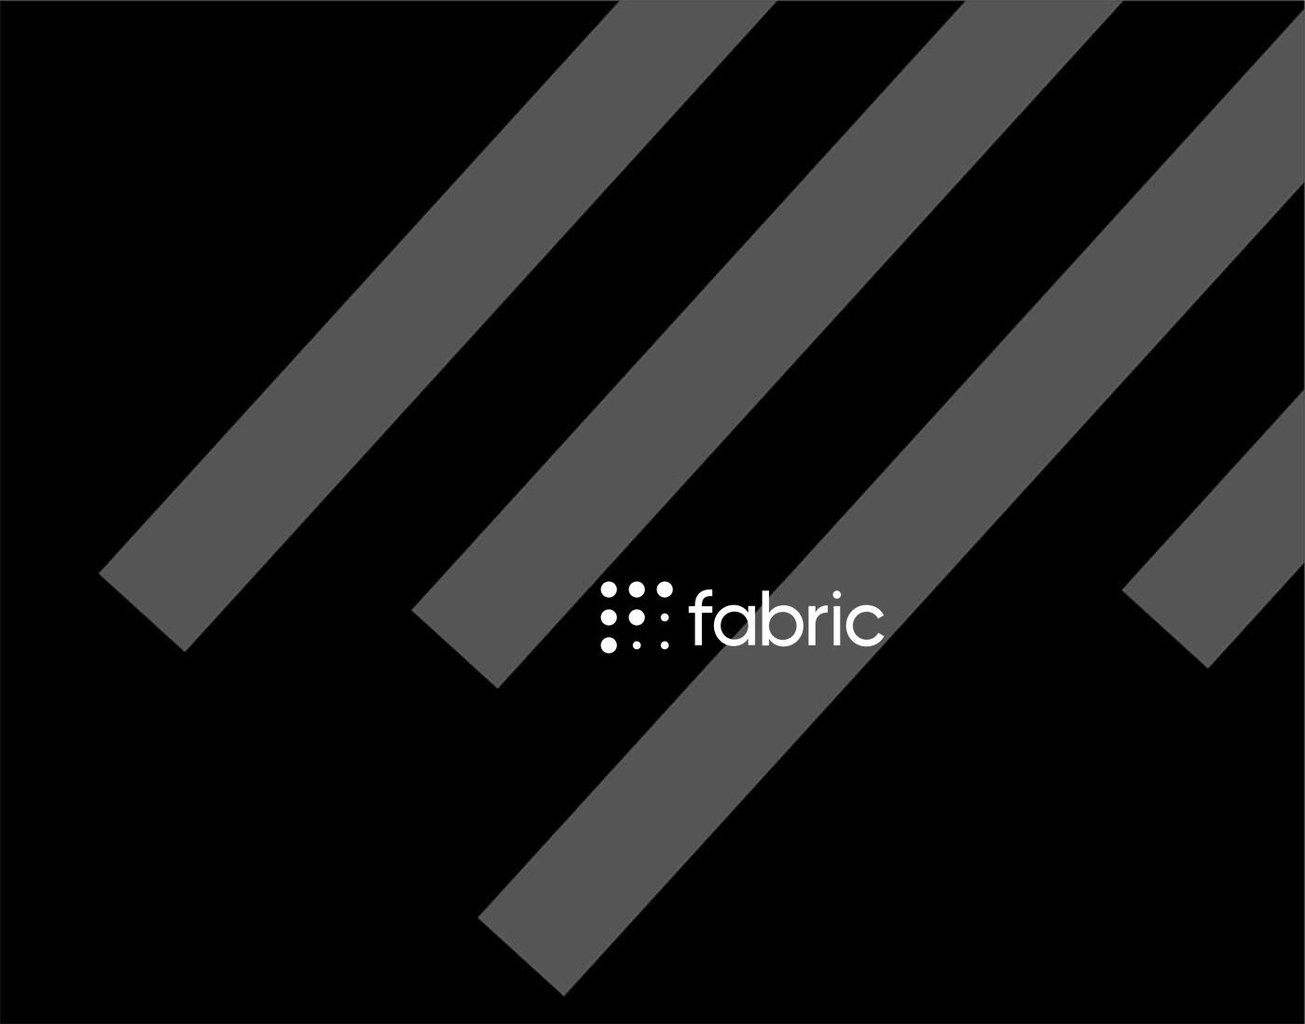 Fabric – Why Sierra Ventures Invested